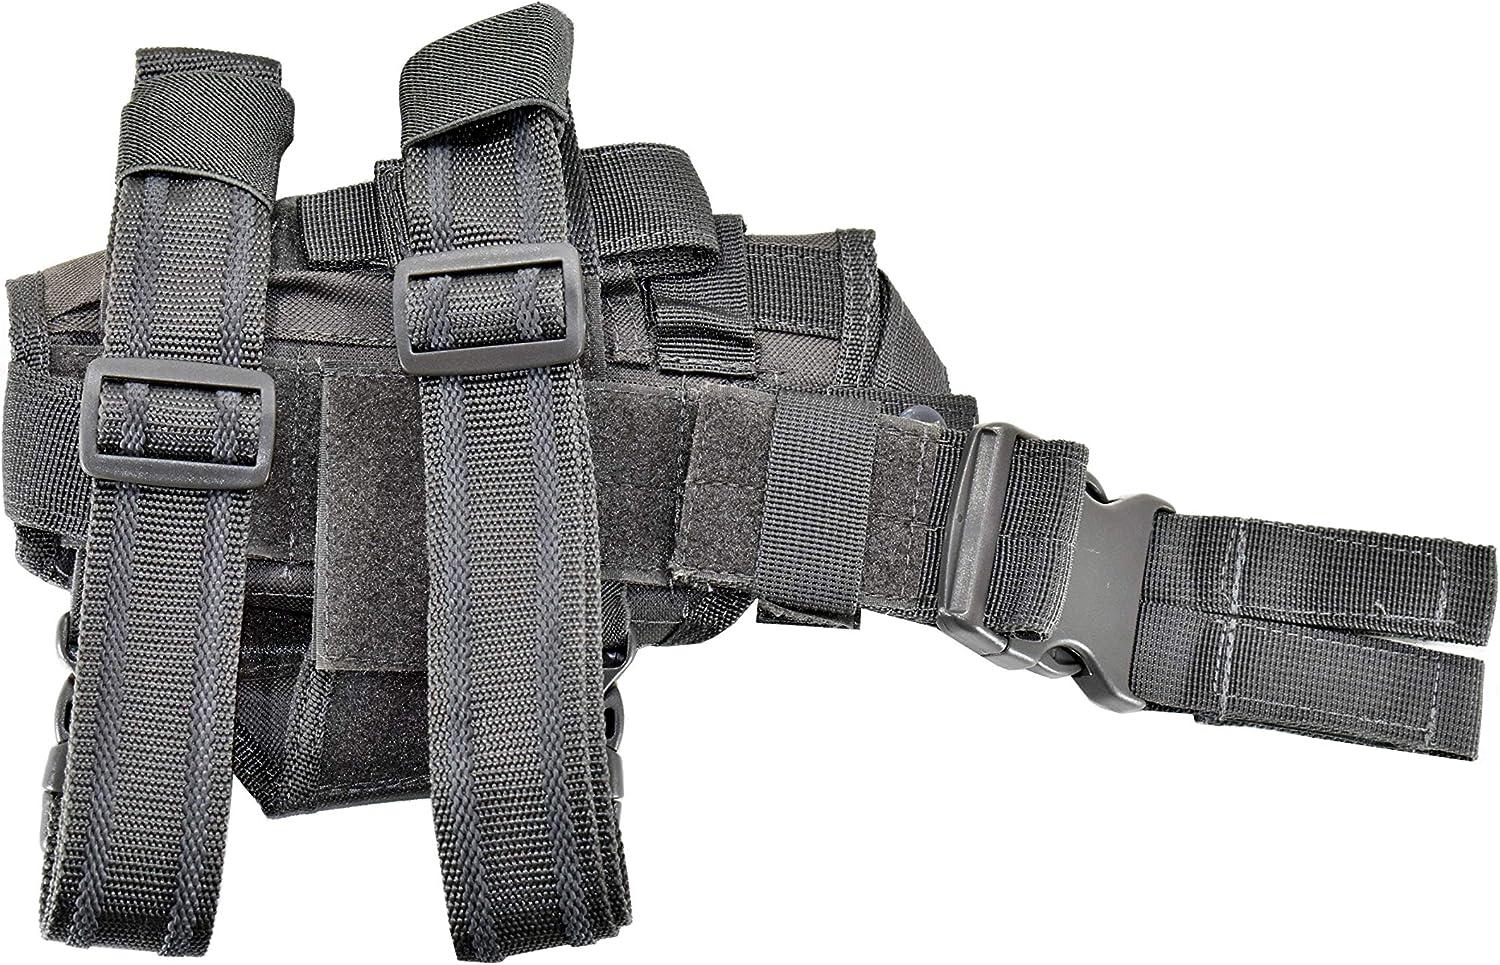 Trinity Tactical Leg Holster Black Compatible with Tippmann tipx